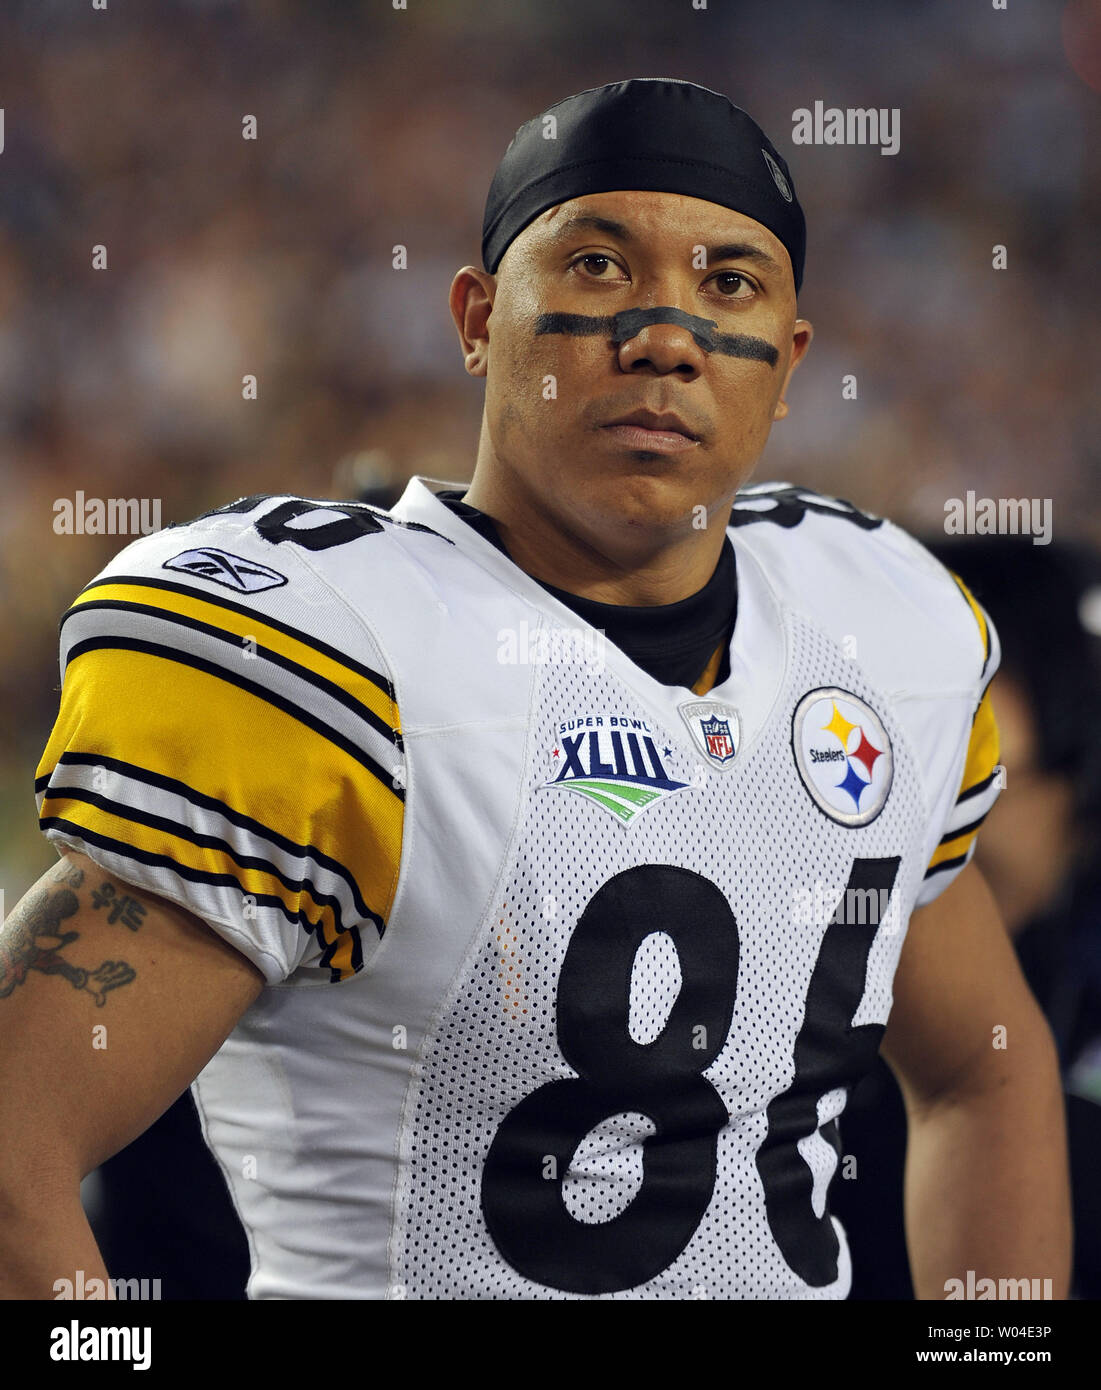 Pittsburgh Steelers wide receiver Hines Ward watchs pre-game activities before Super Bowl XLIII at Raymond James Stadium in Tampa, Florida, on February 1, 2009. (UPI Photo/Kevin Dietsch) Stock Photo